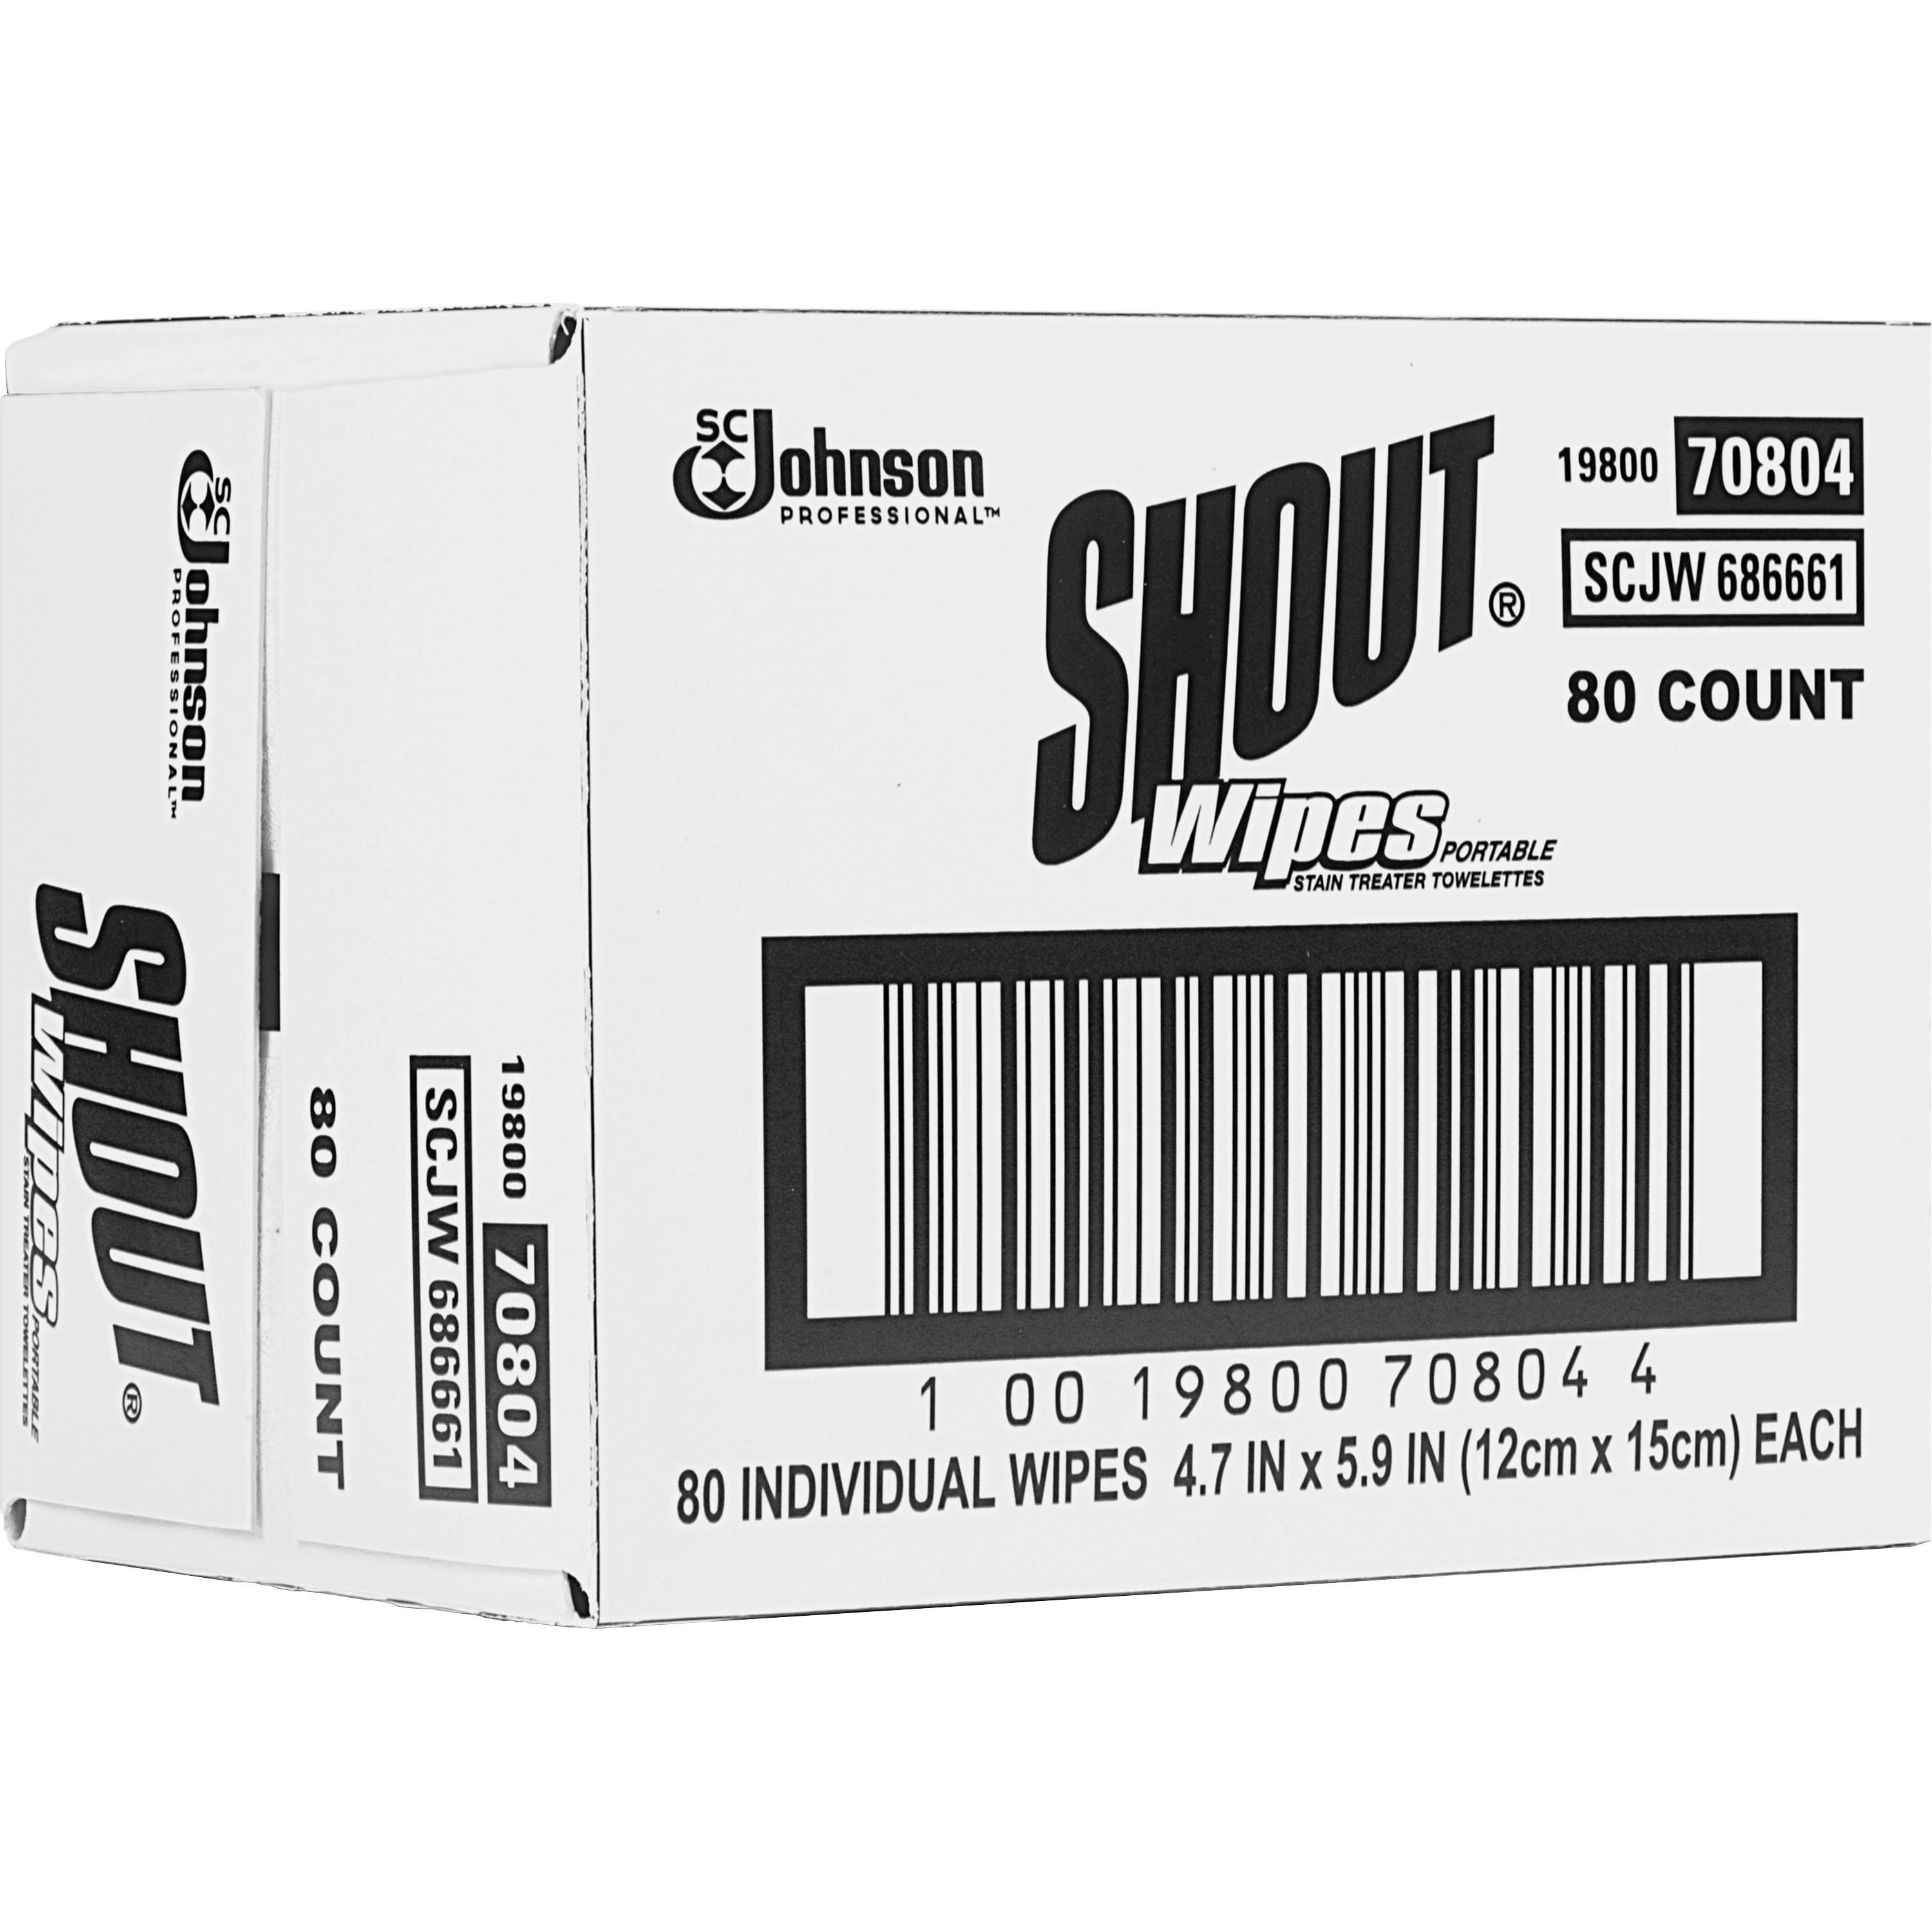 Shout Wipes - Portable Stain Treater Towelettes - Pack of (24) Wipes